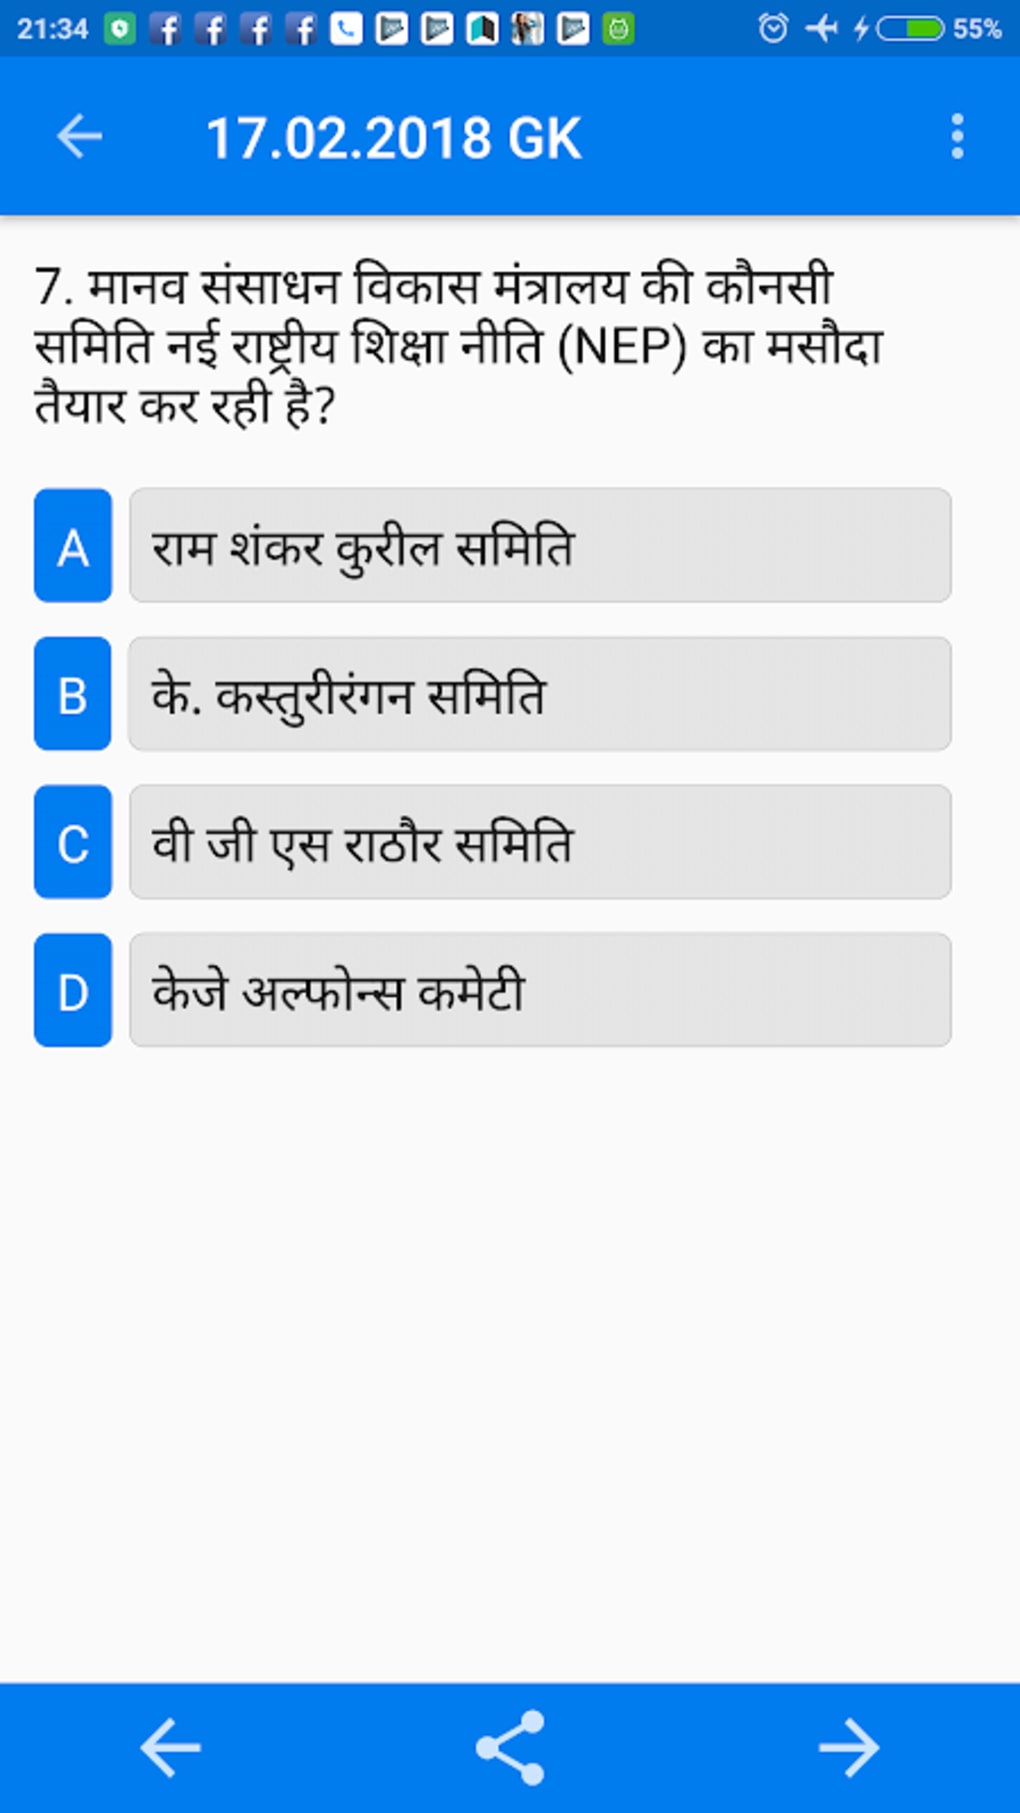 Daily Gk Current Affairs Apk For Android Download 4625